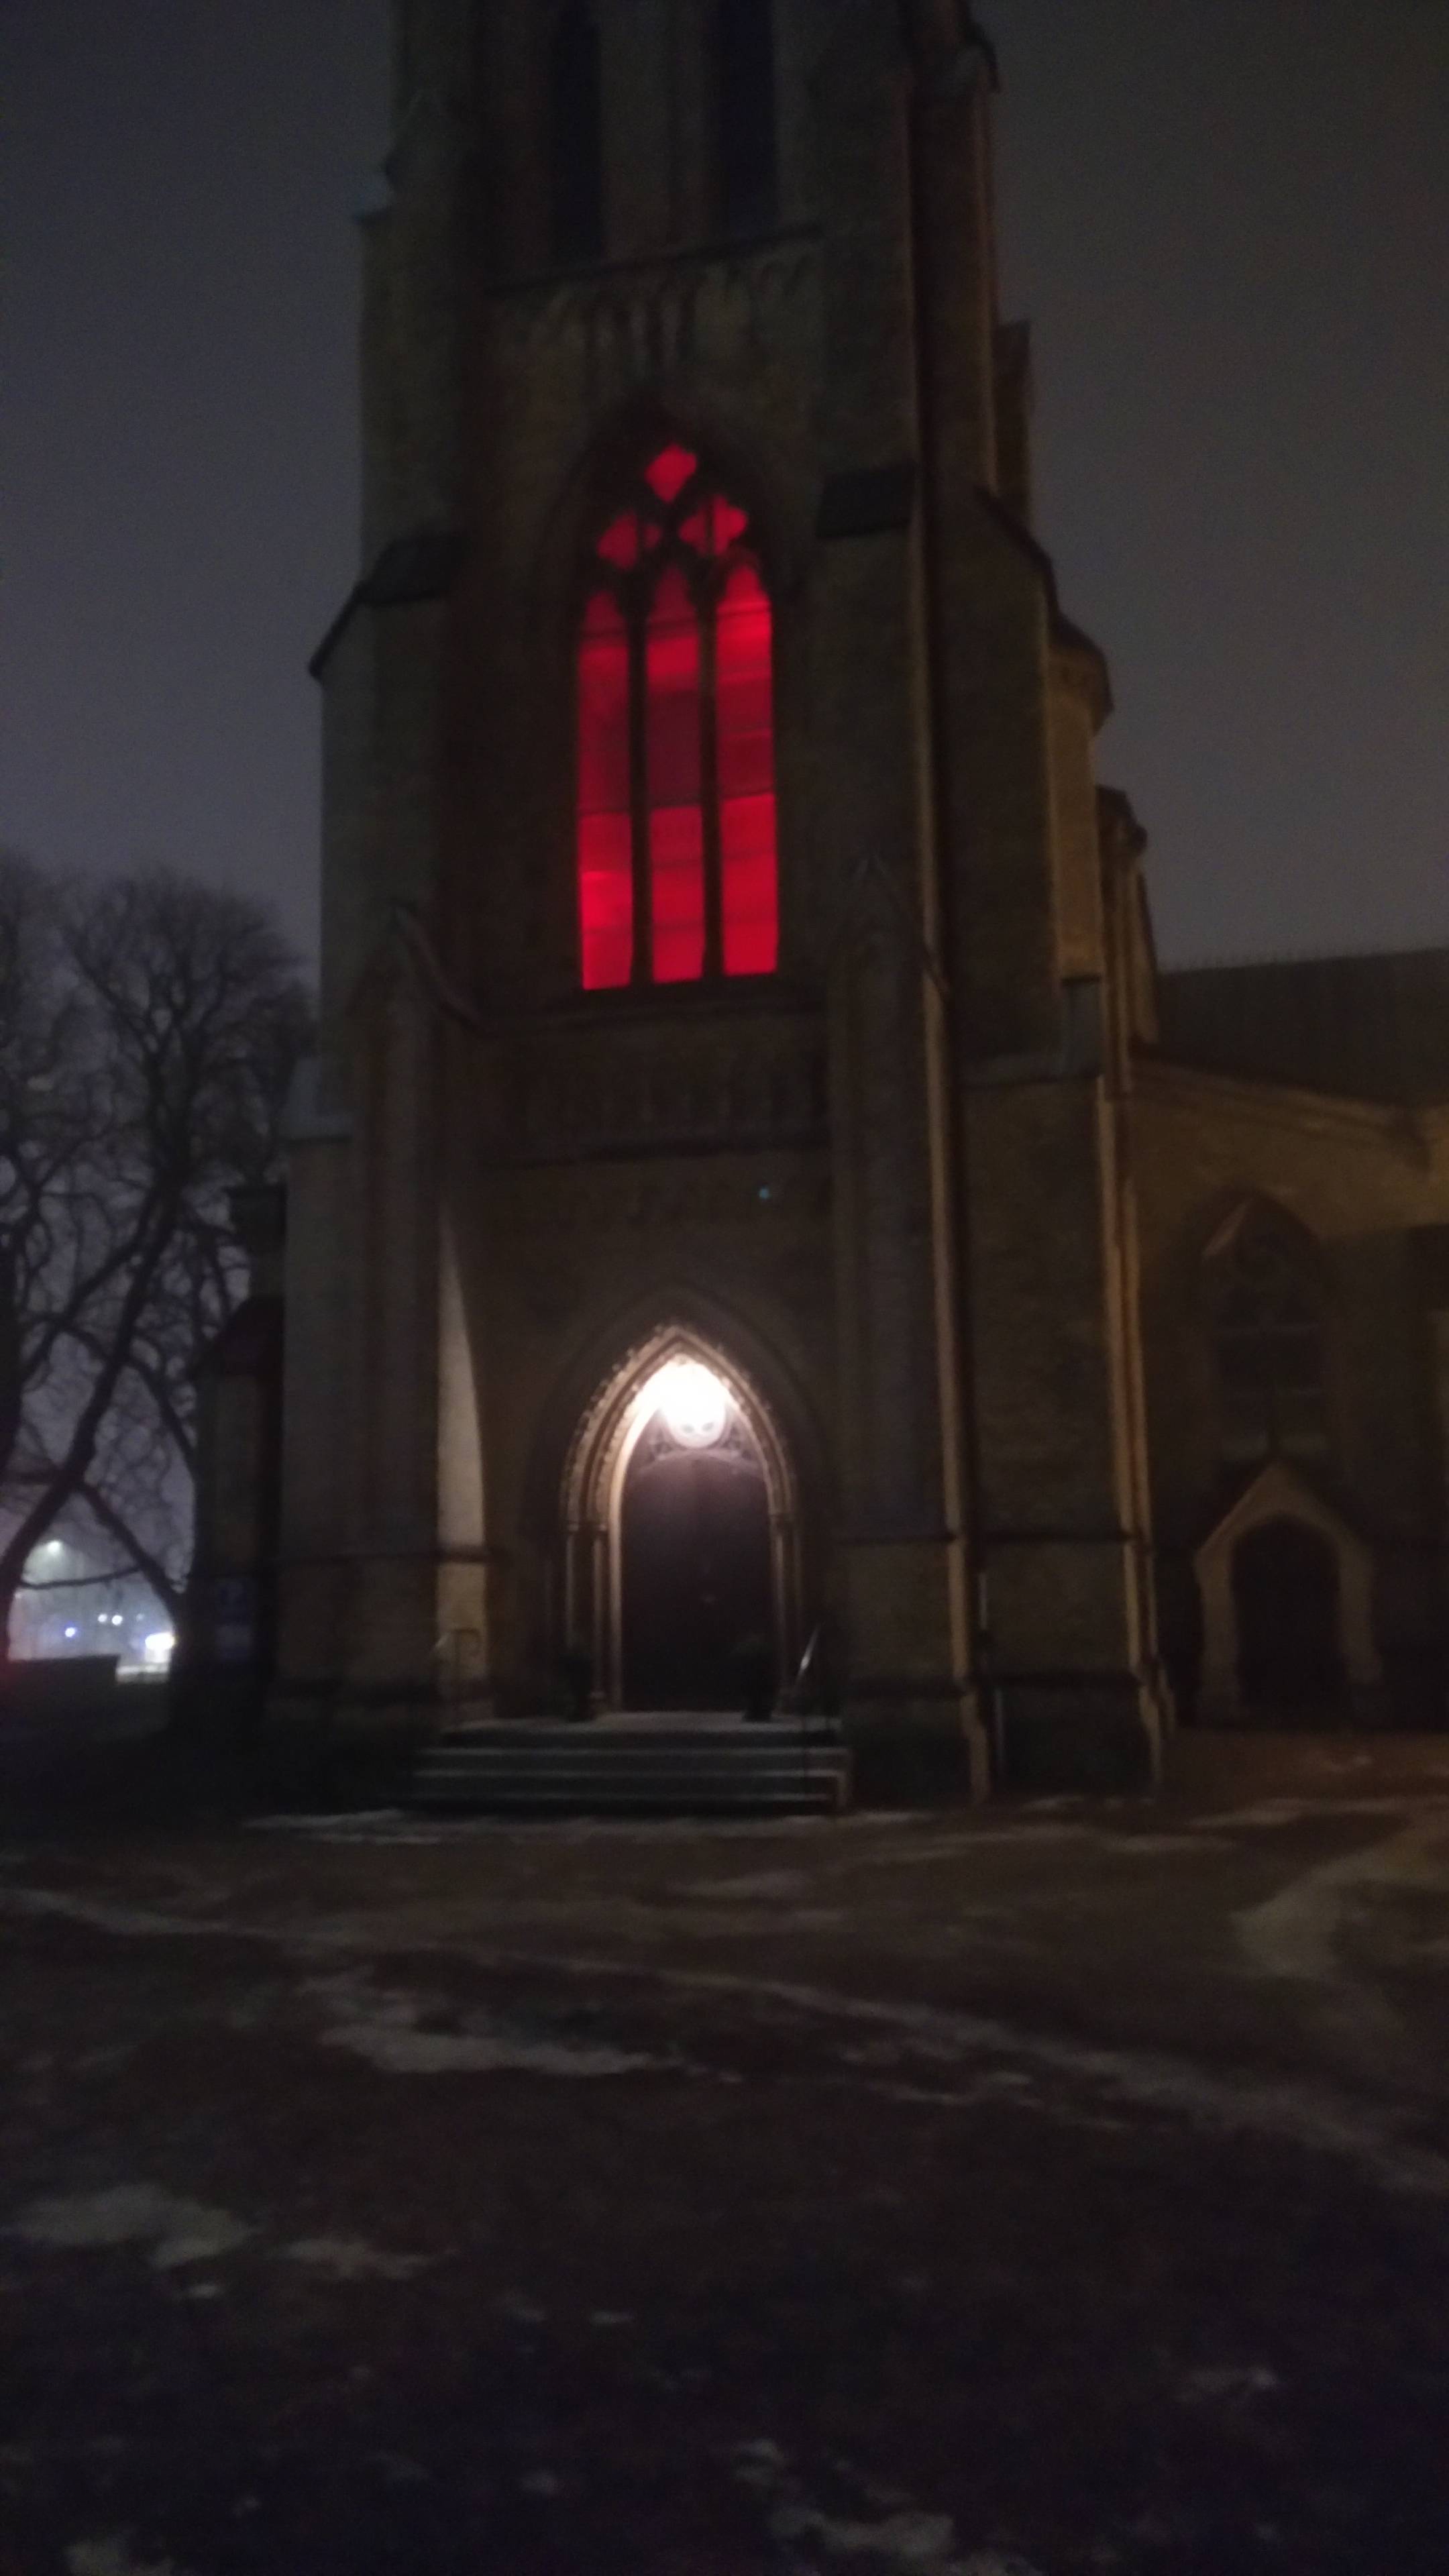 Part of the front of new-gothic church in the fog. The big windows are lighted up from within with red light.